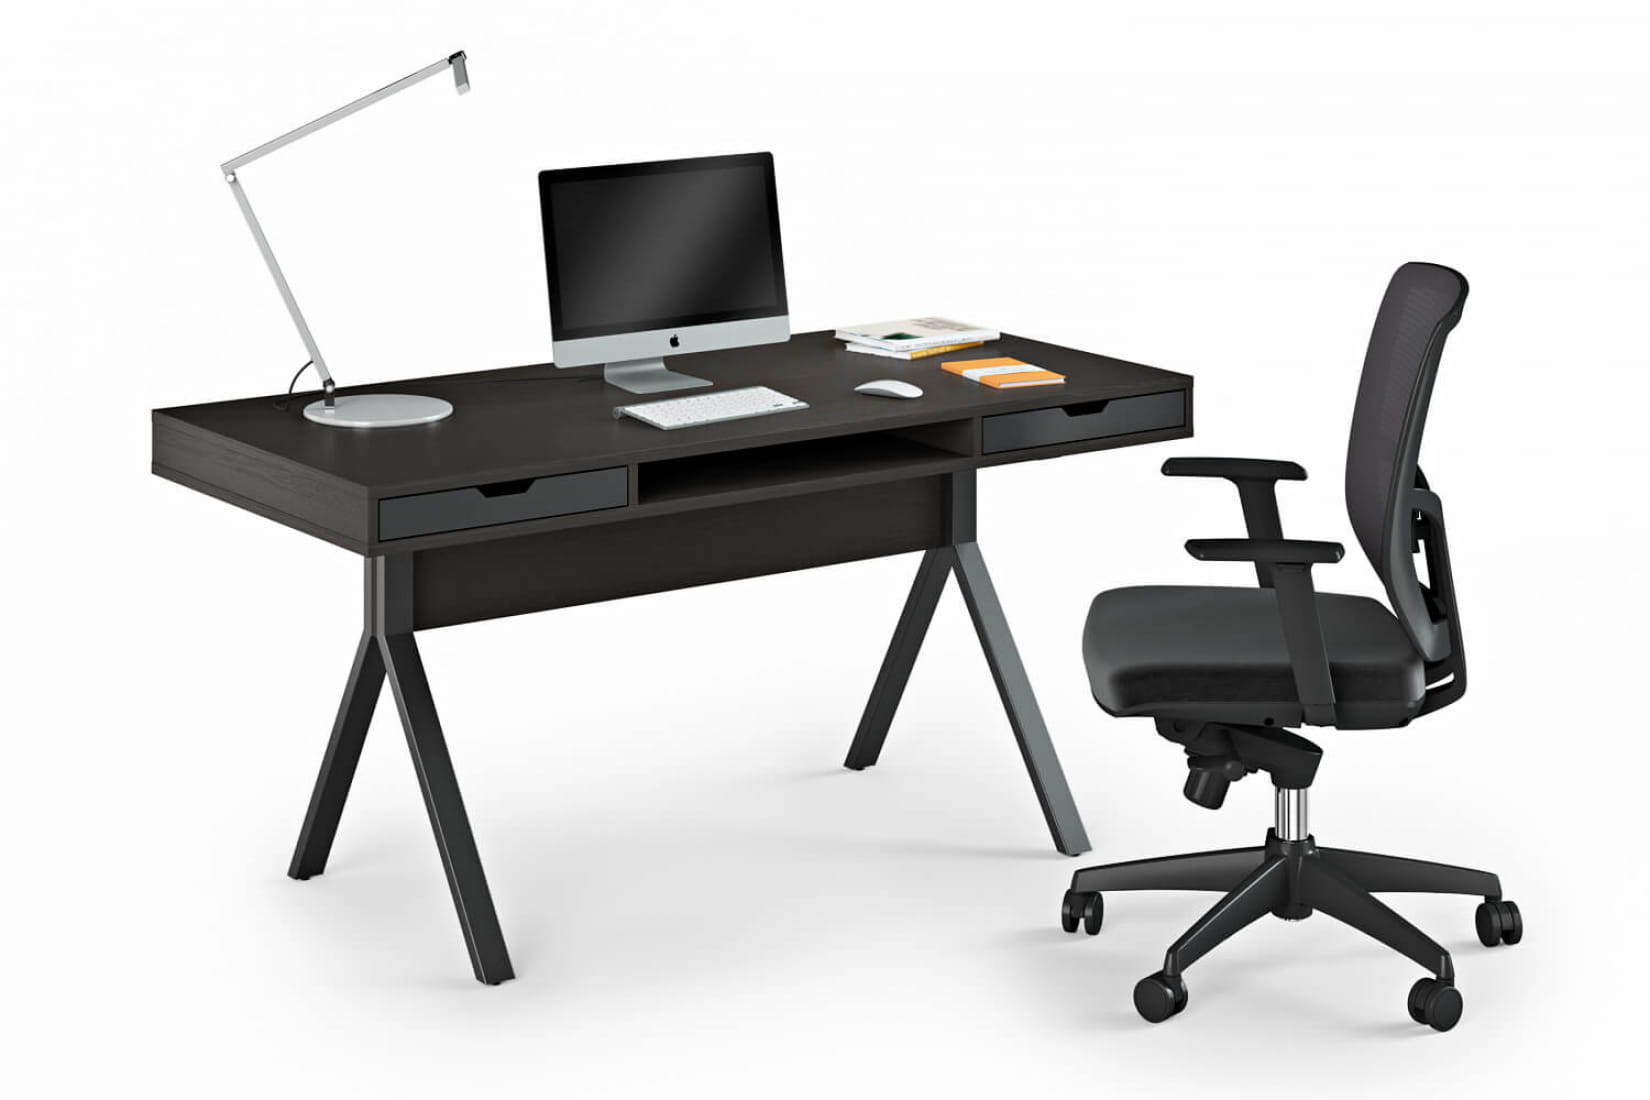 outsource-3d-modeling-services-for-a-black-office-table-and-chair-design-by-archicgi